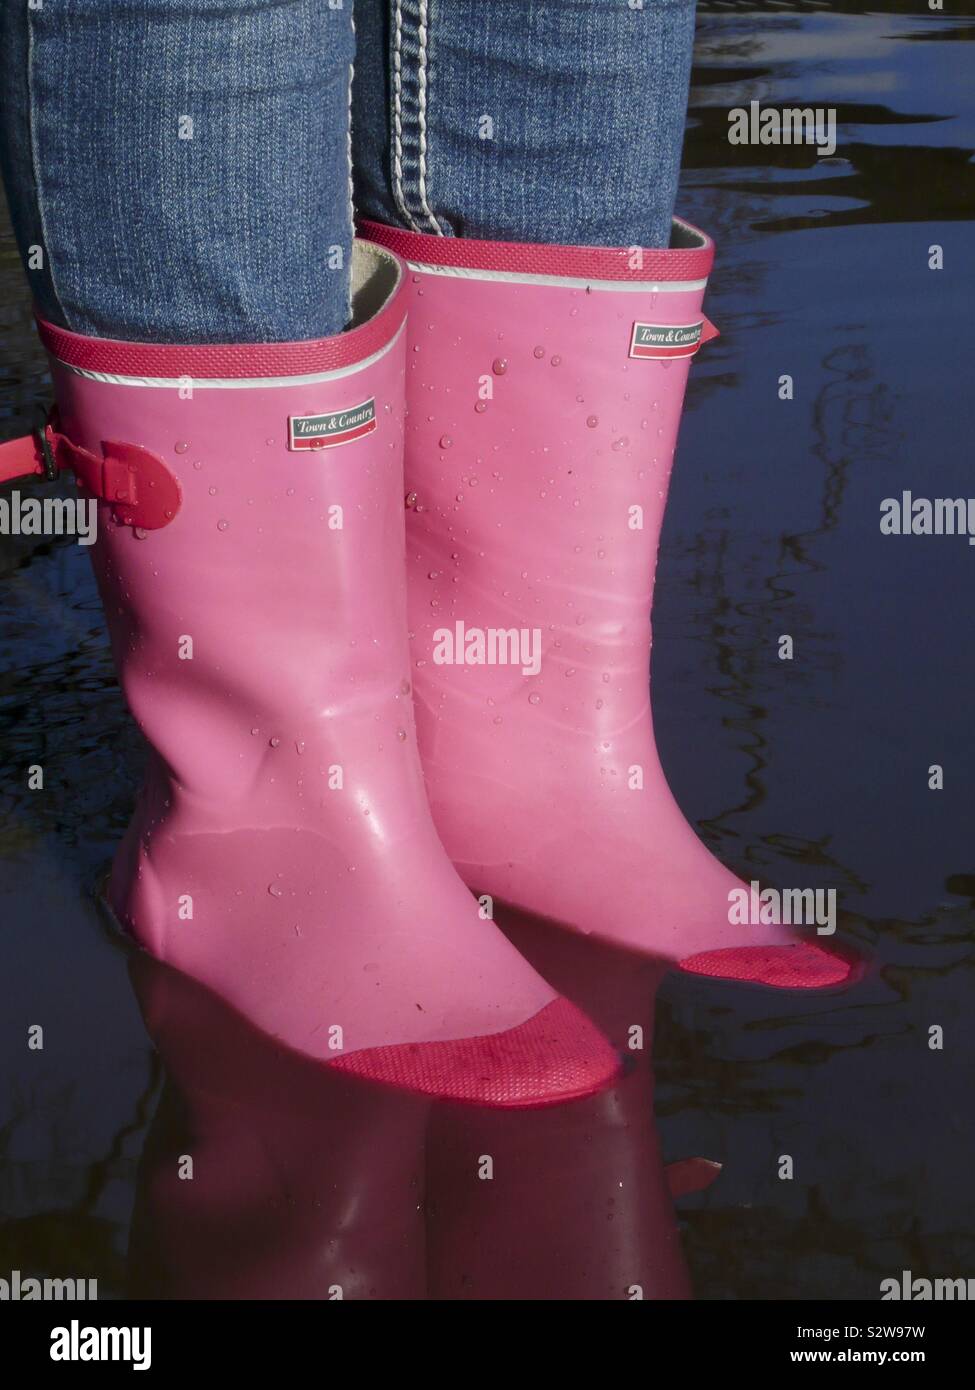 Briers Patterned Pink Spotted Wellington Boots UK Size 4 #7R543 